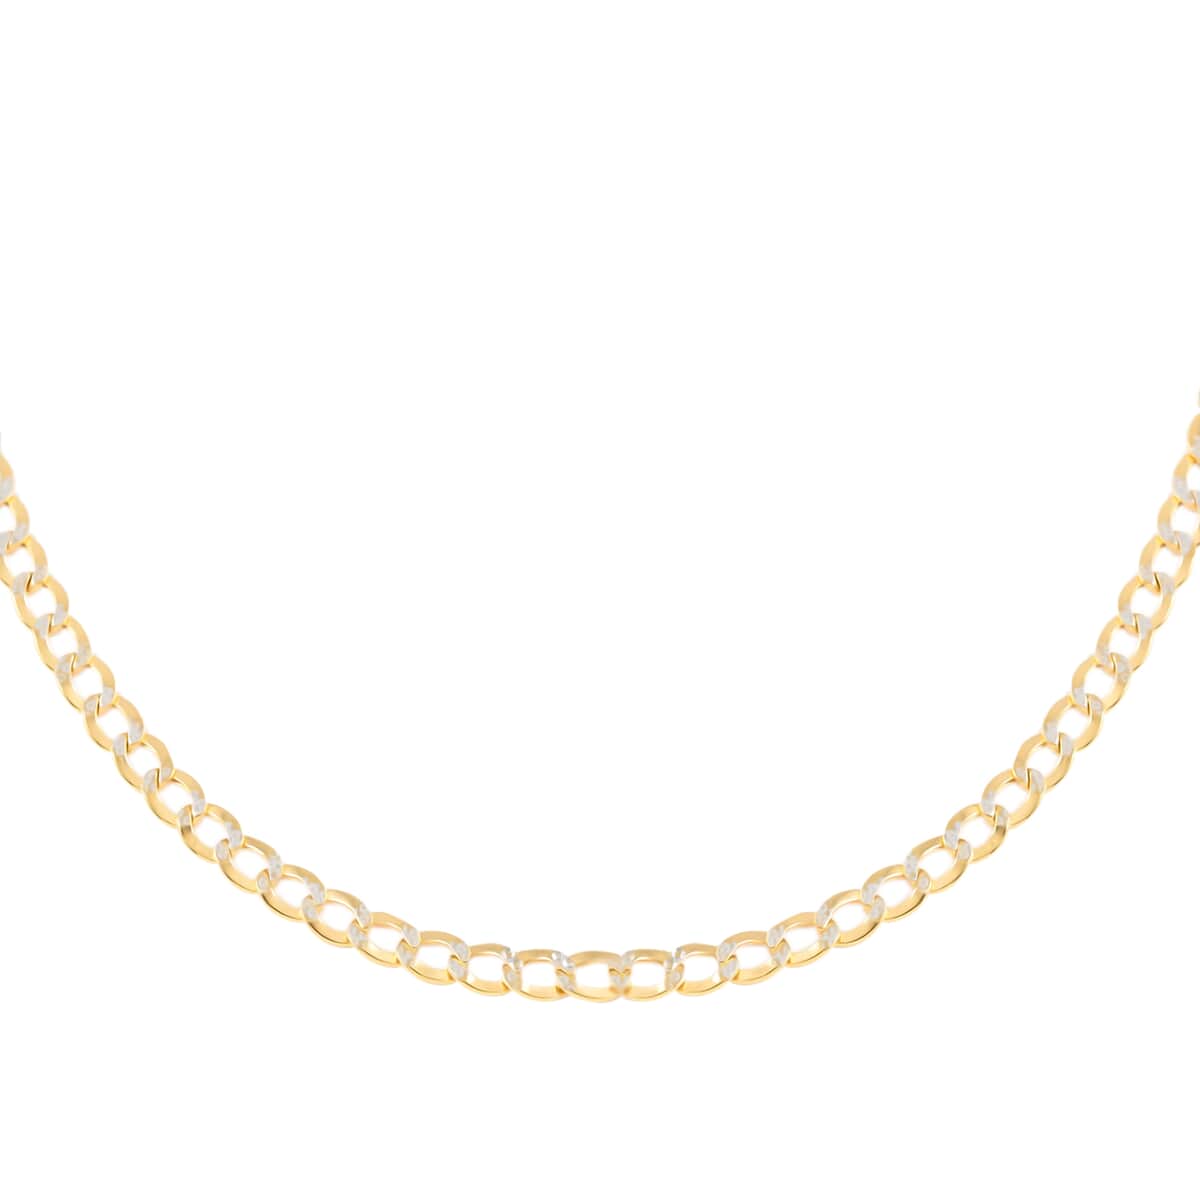 Italian 14K Yellow, White Gold 3.5mm Cuban Pave Necklace 20 Inches 4.50 Grams image number 0